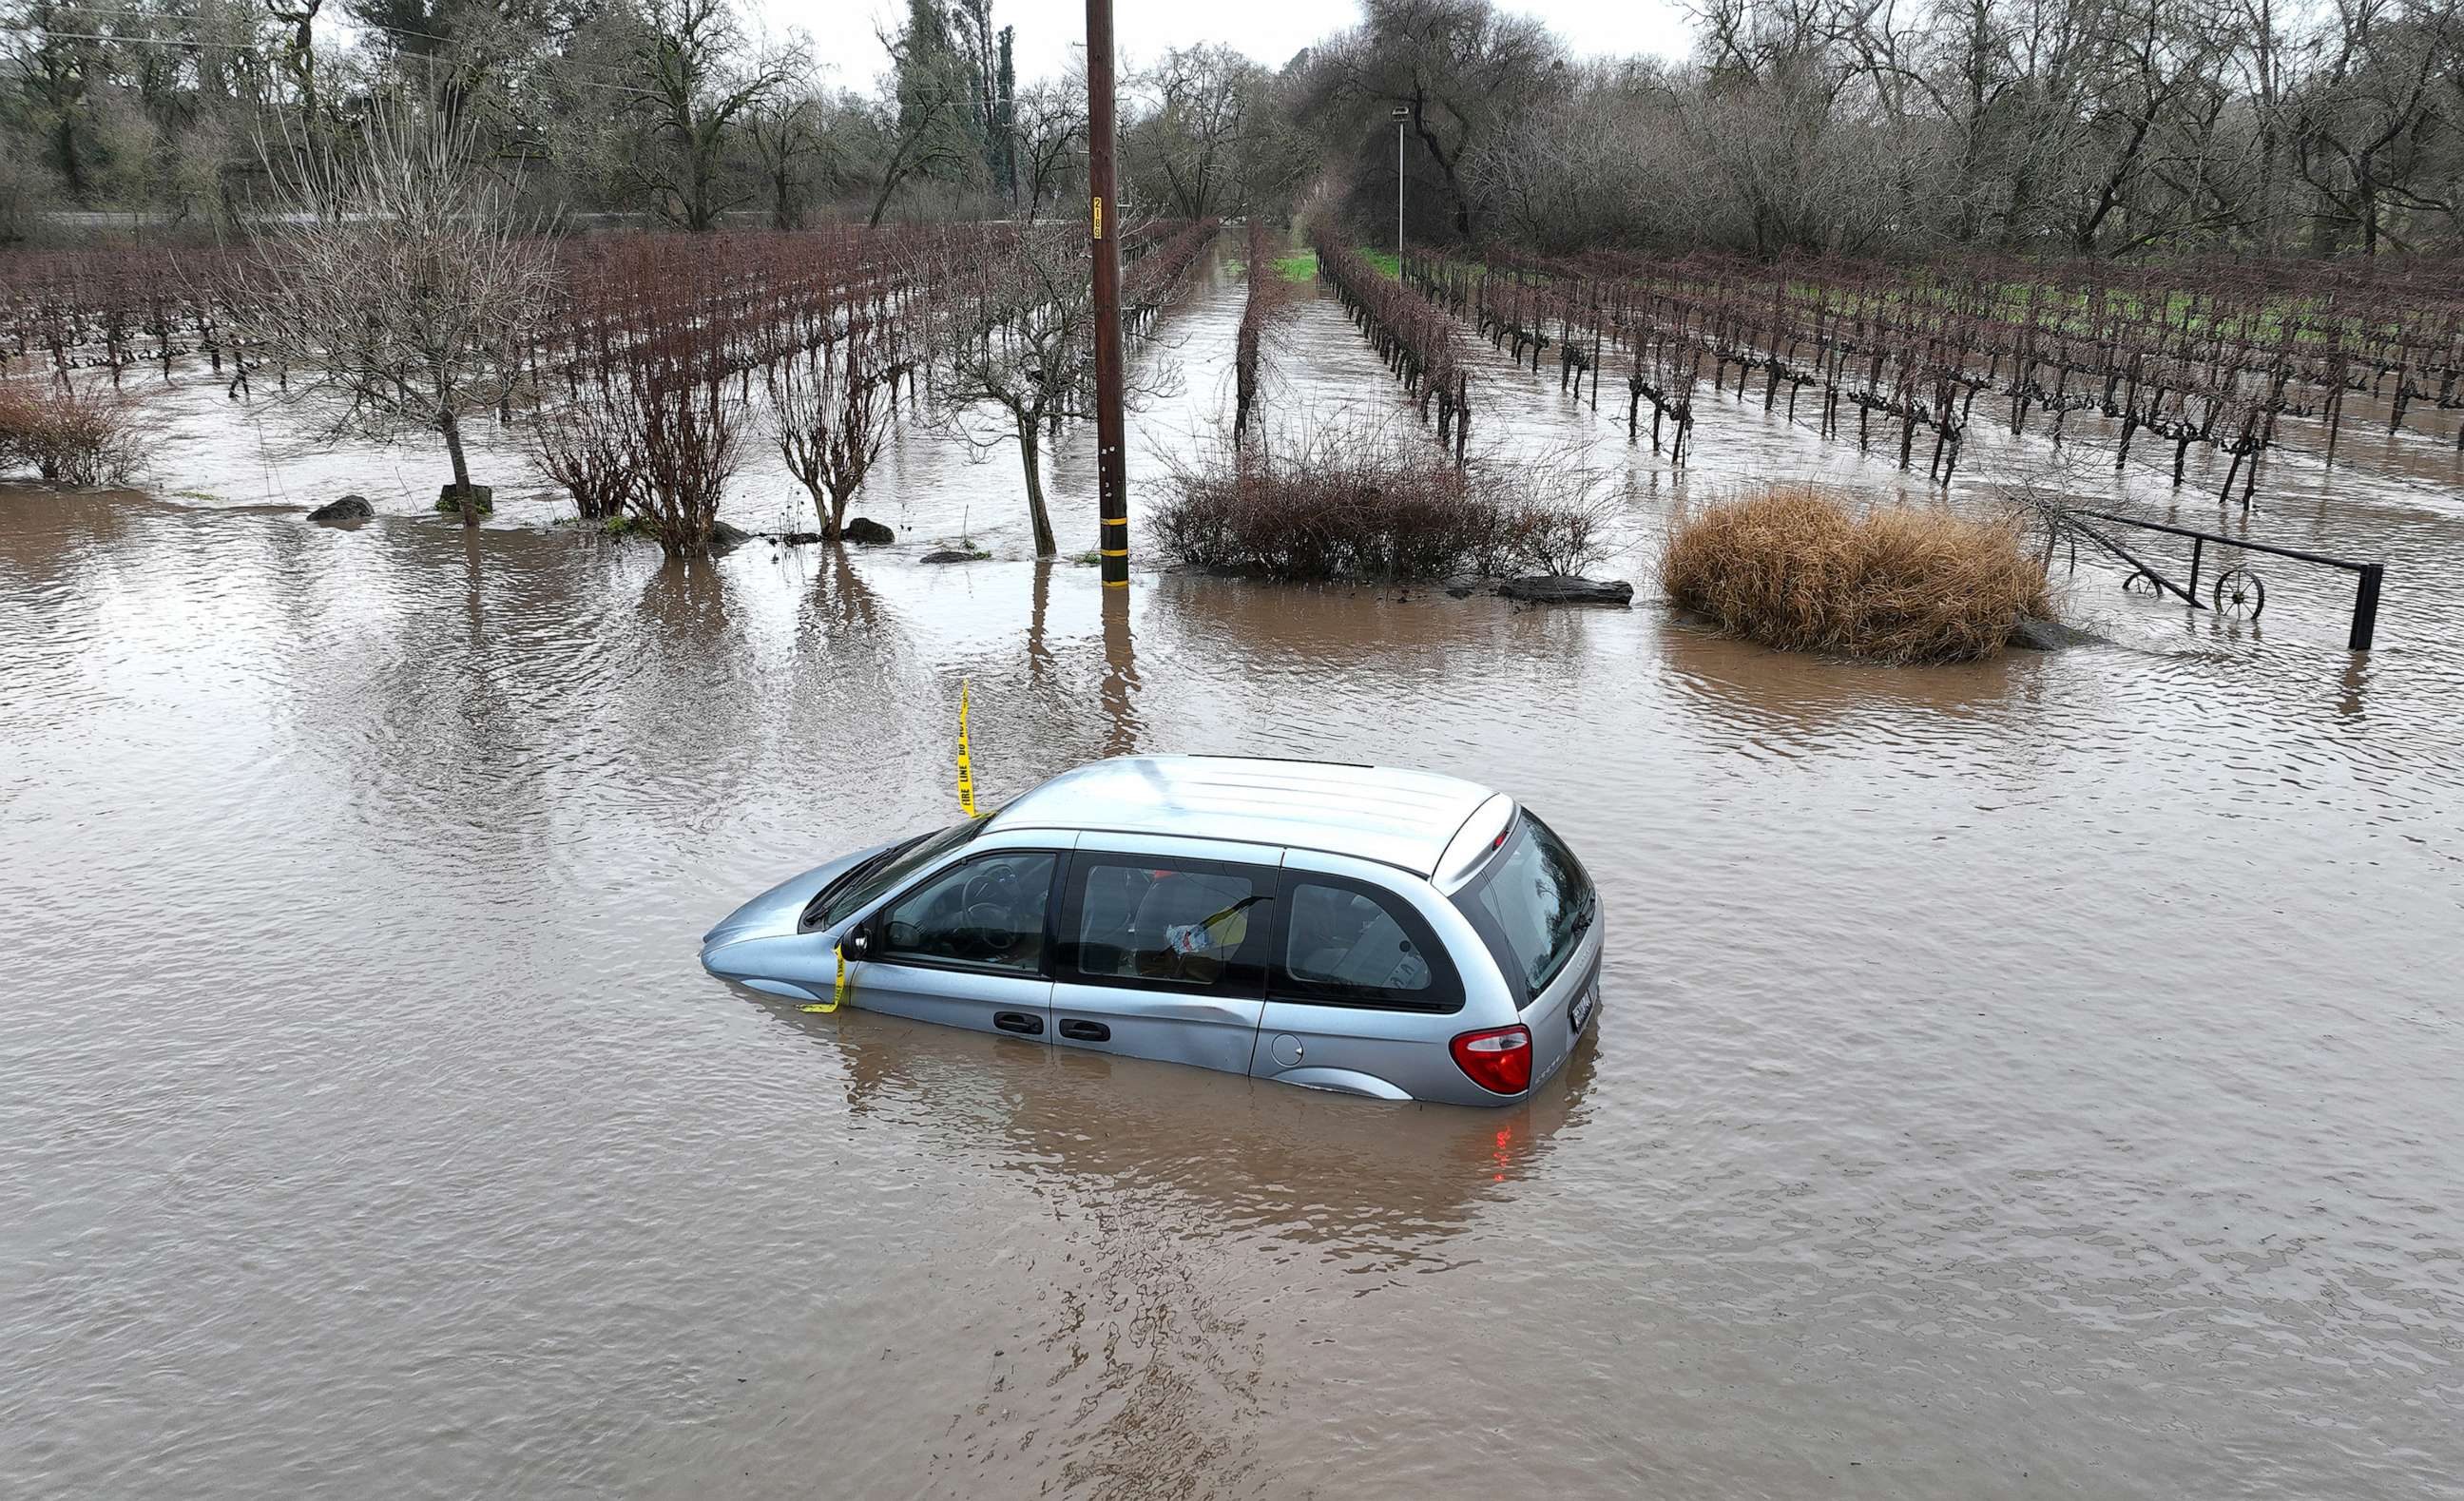 PHOTO: A car is submerged in floodwater after heavy rain moved through the area, Jan. 9, 2023, in Windsor, Calif.